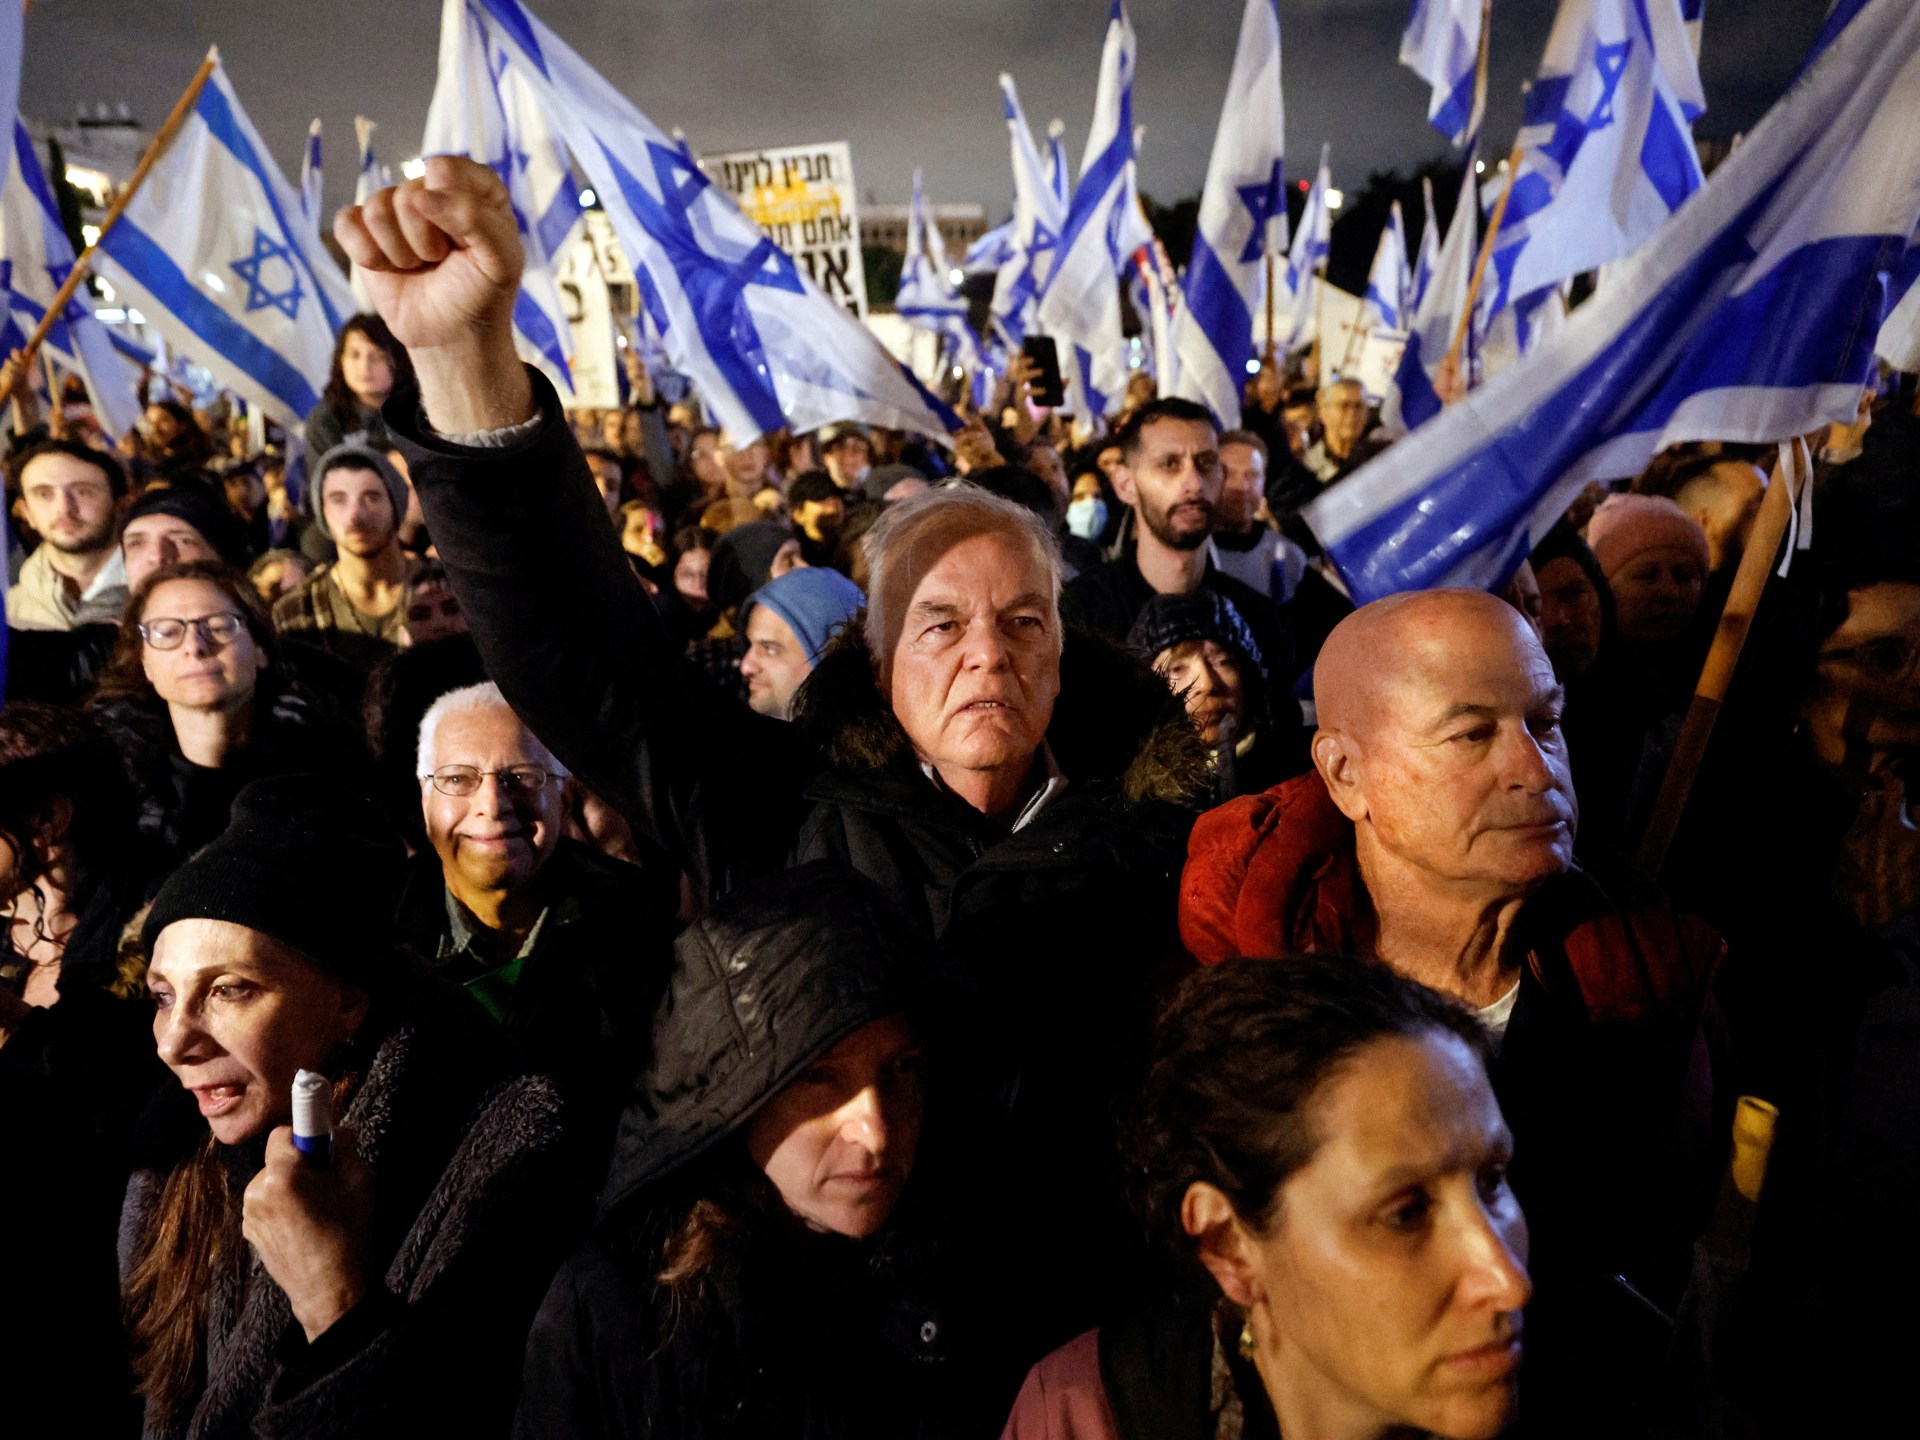 Israelis are not demonstrating for democracy | Opinions